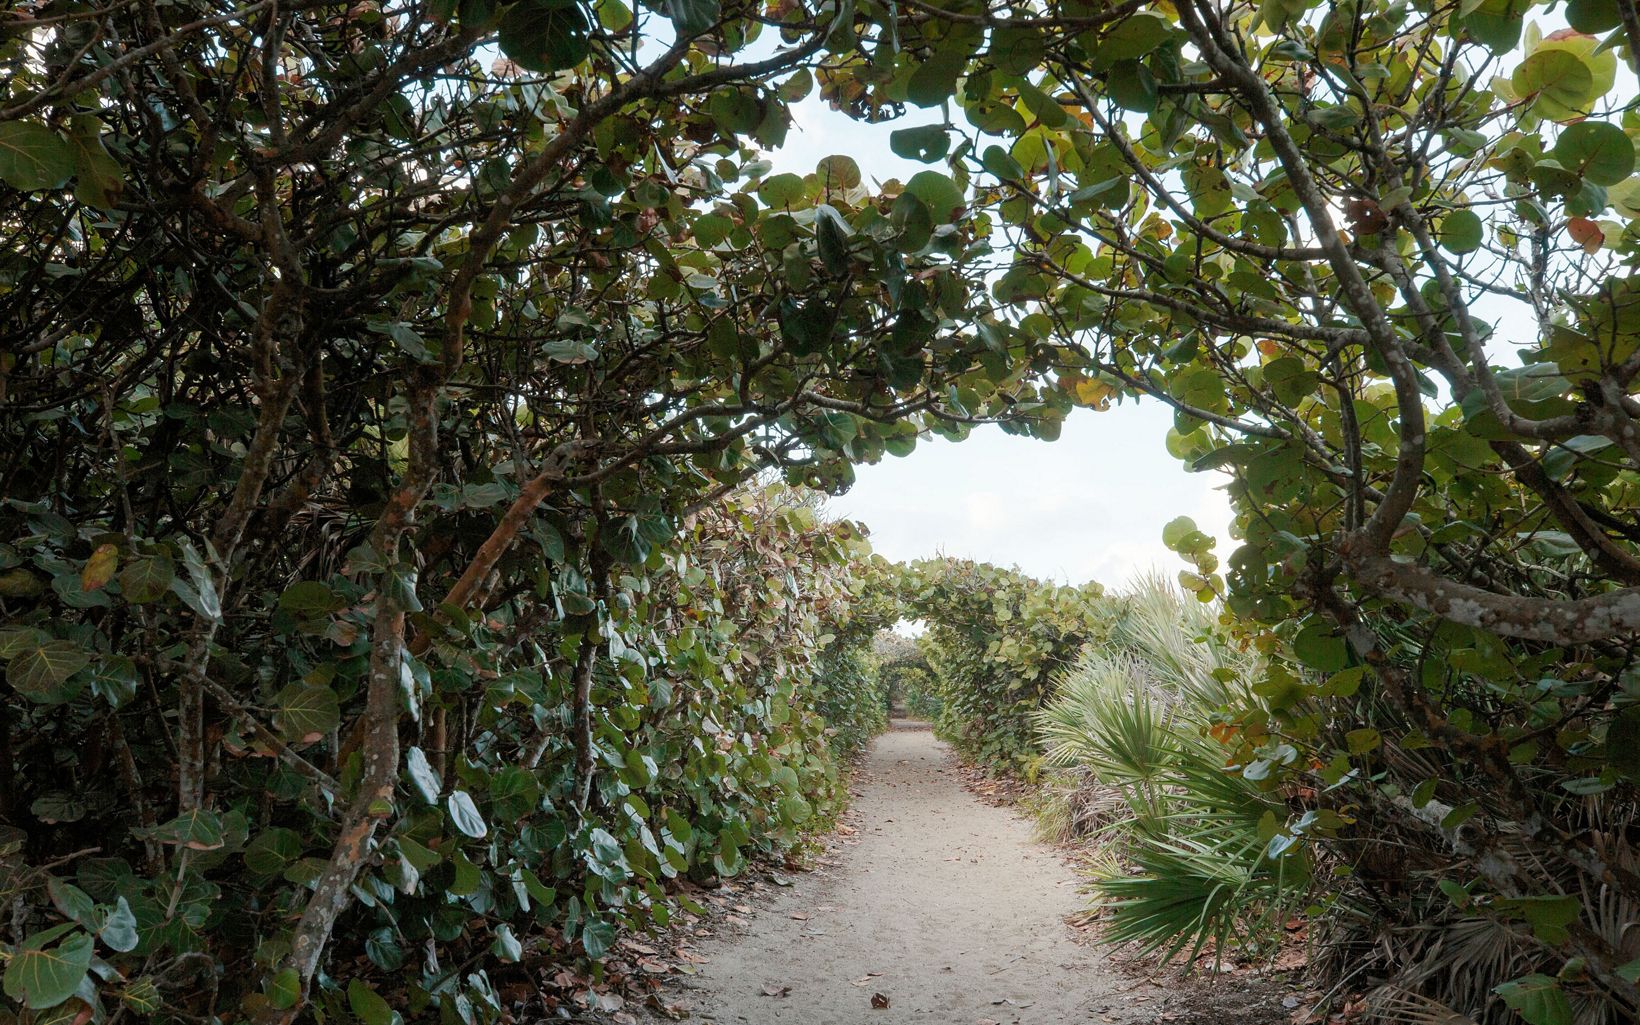 Sea grape tunnel on the Beach Dune trail at Blowing Rocks Preserve.